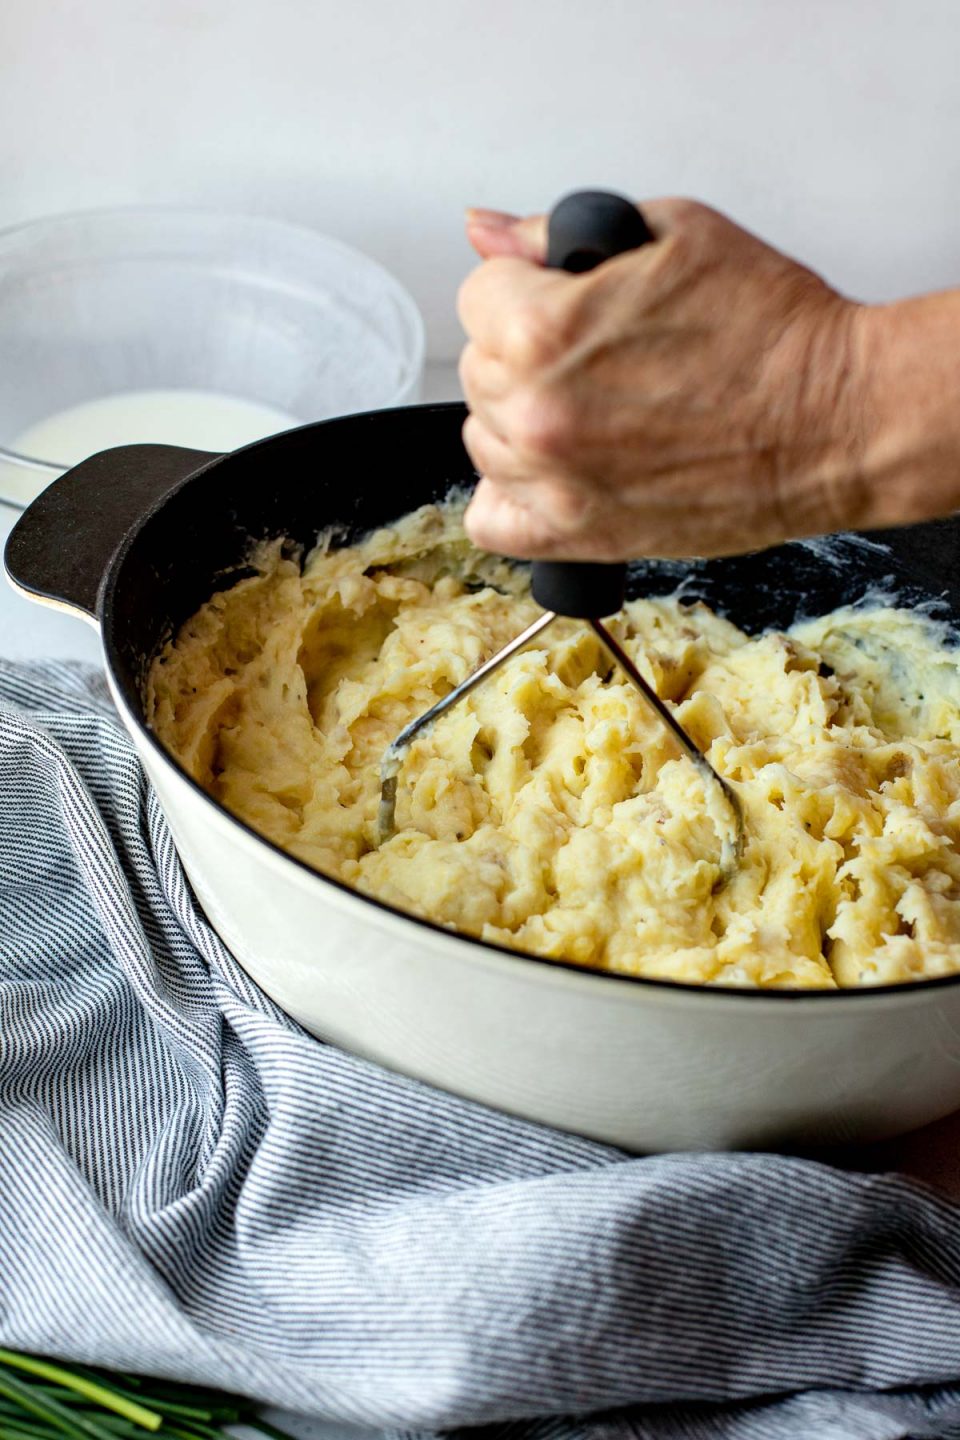 A side angle shot of a white dutch oven filled with Roasted Garlic Buttermilk Mashed Potatoes. The dutch oven sits atop a creamy white textured surface. A woman's hand holds a potato masher and is using it to mash up the potatoes within the dutch oven. A blue and white striped linen napkin, a pile of chive scapes, and a clear glass bowl filled with buttermilk ​also rest on the surface & surround the serving bowl.